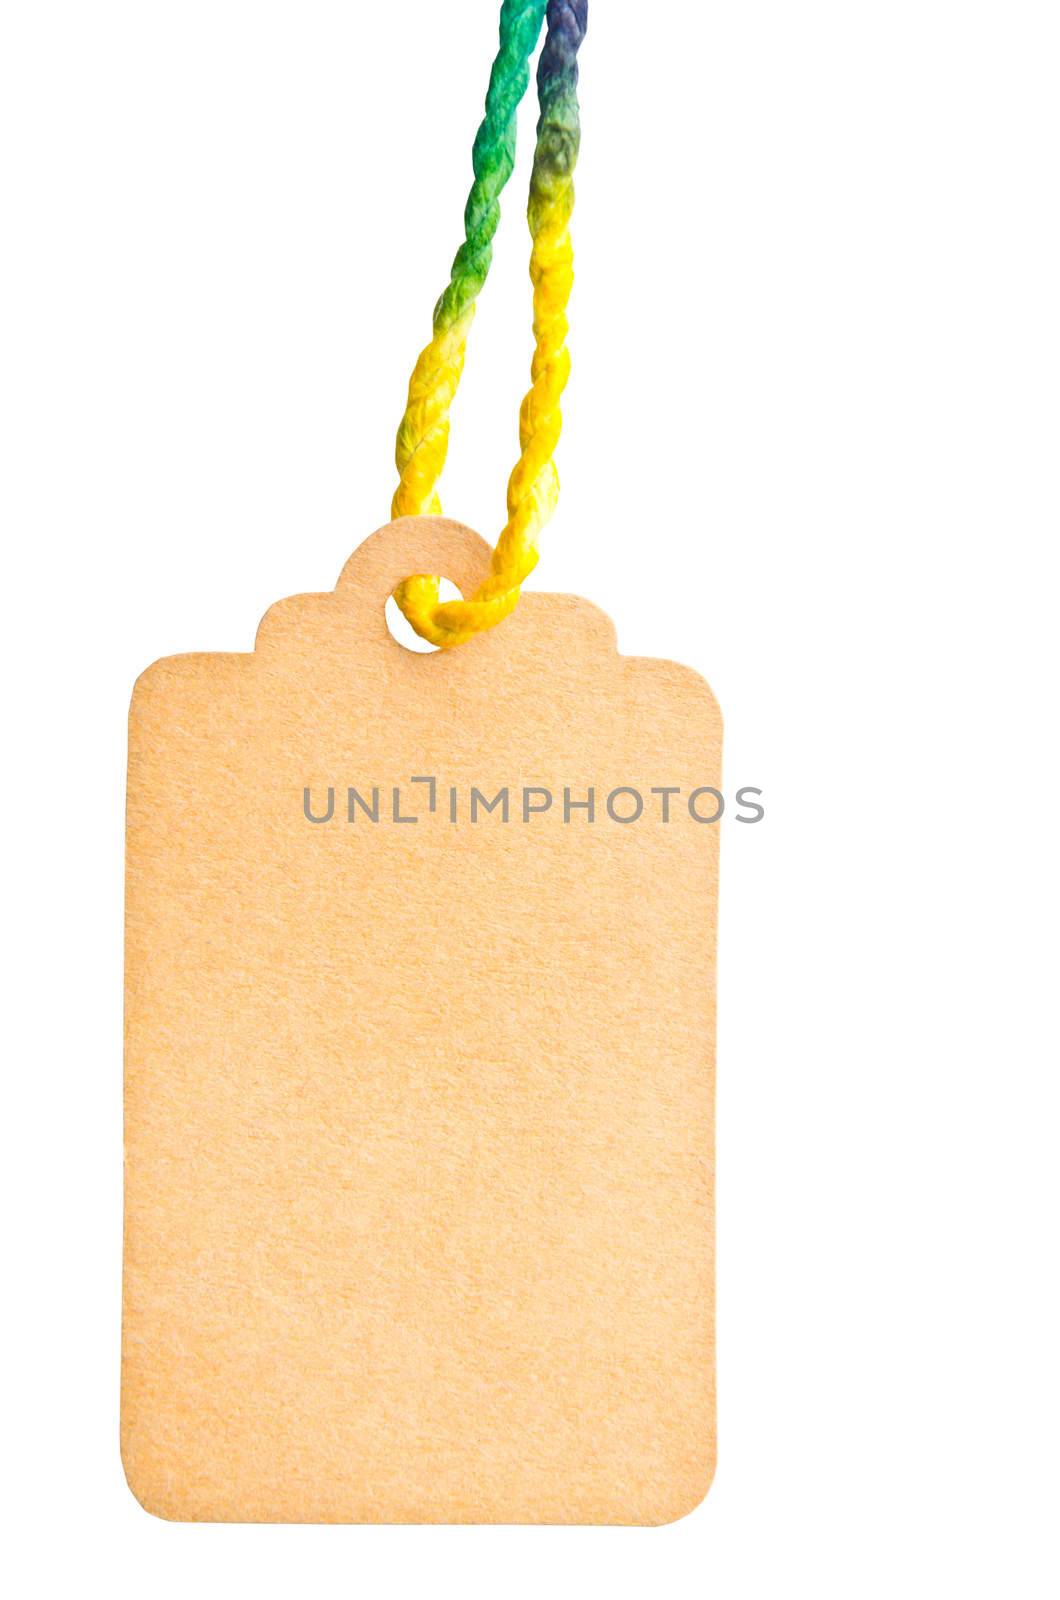 Blank tag isolated against a white background by Gamjai